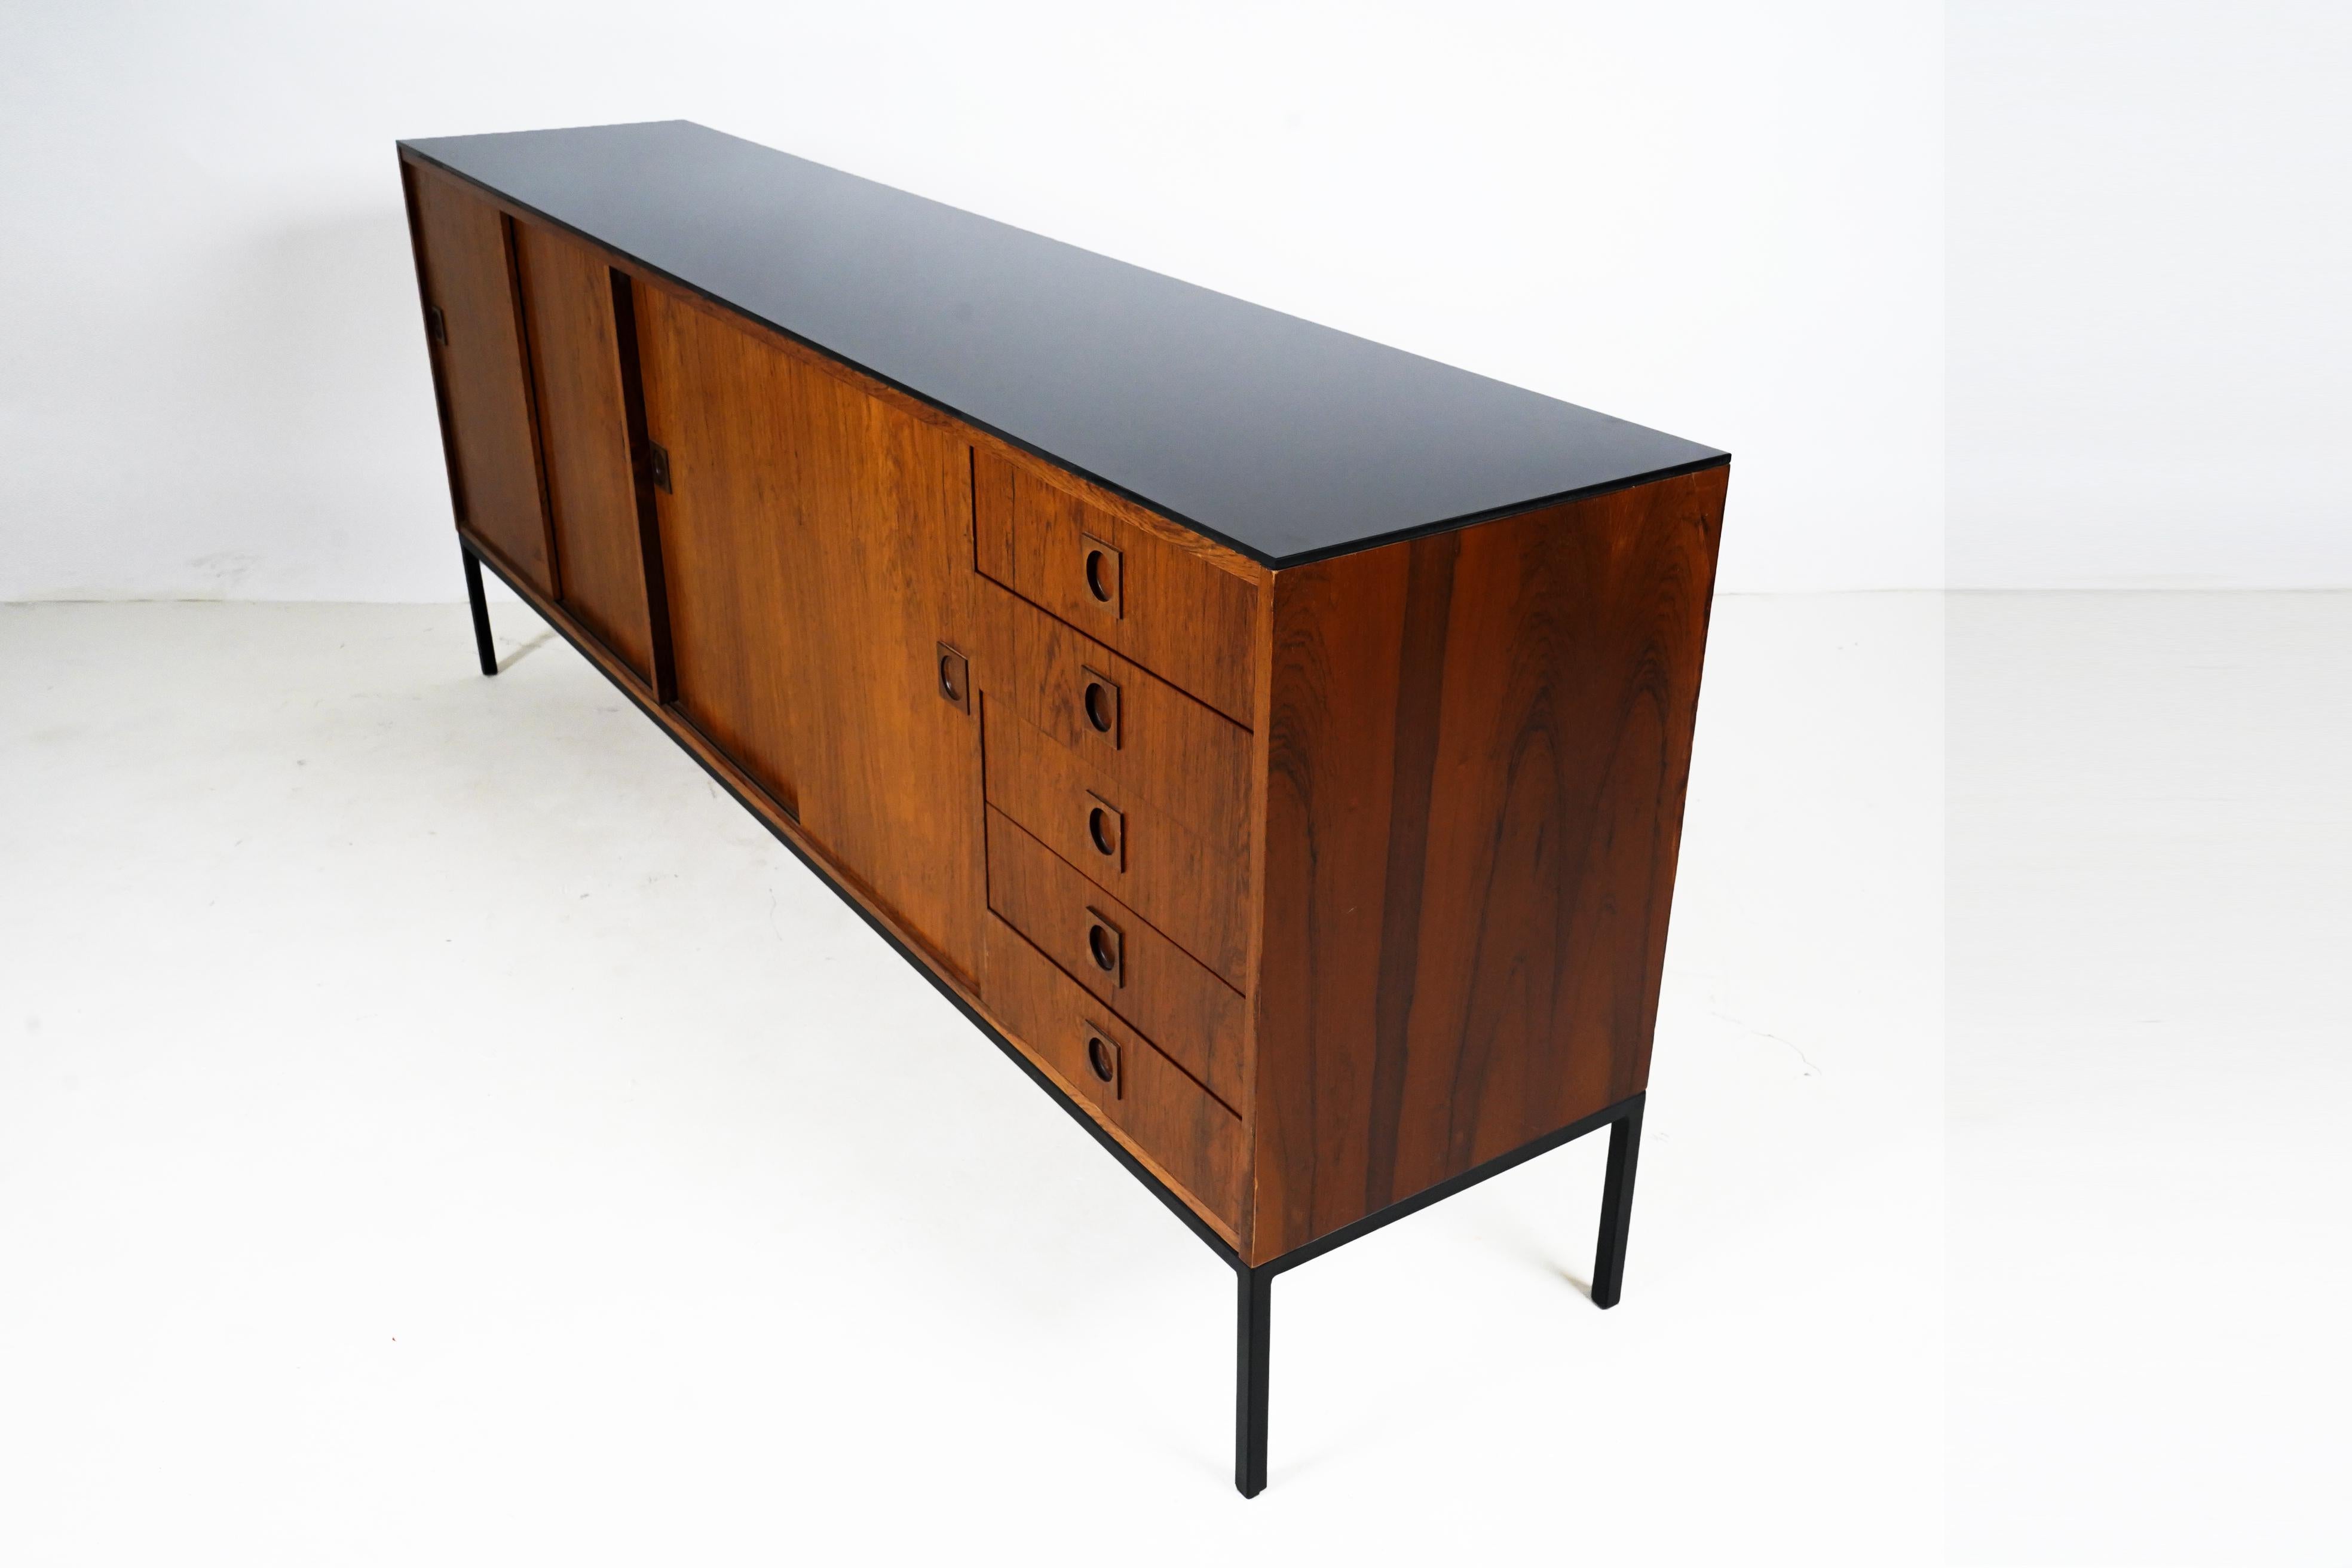 This stunning sideboard is maximally Minimalist, with absolutely no decoration, aside from the beauty of the perfectly matched walnut veneers. Whereas many high-quality Scandinavian pieces of the postwar period featured exotic hardwoods such as teak